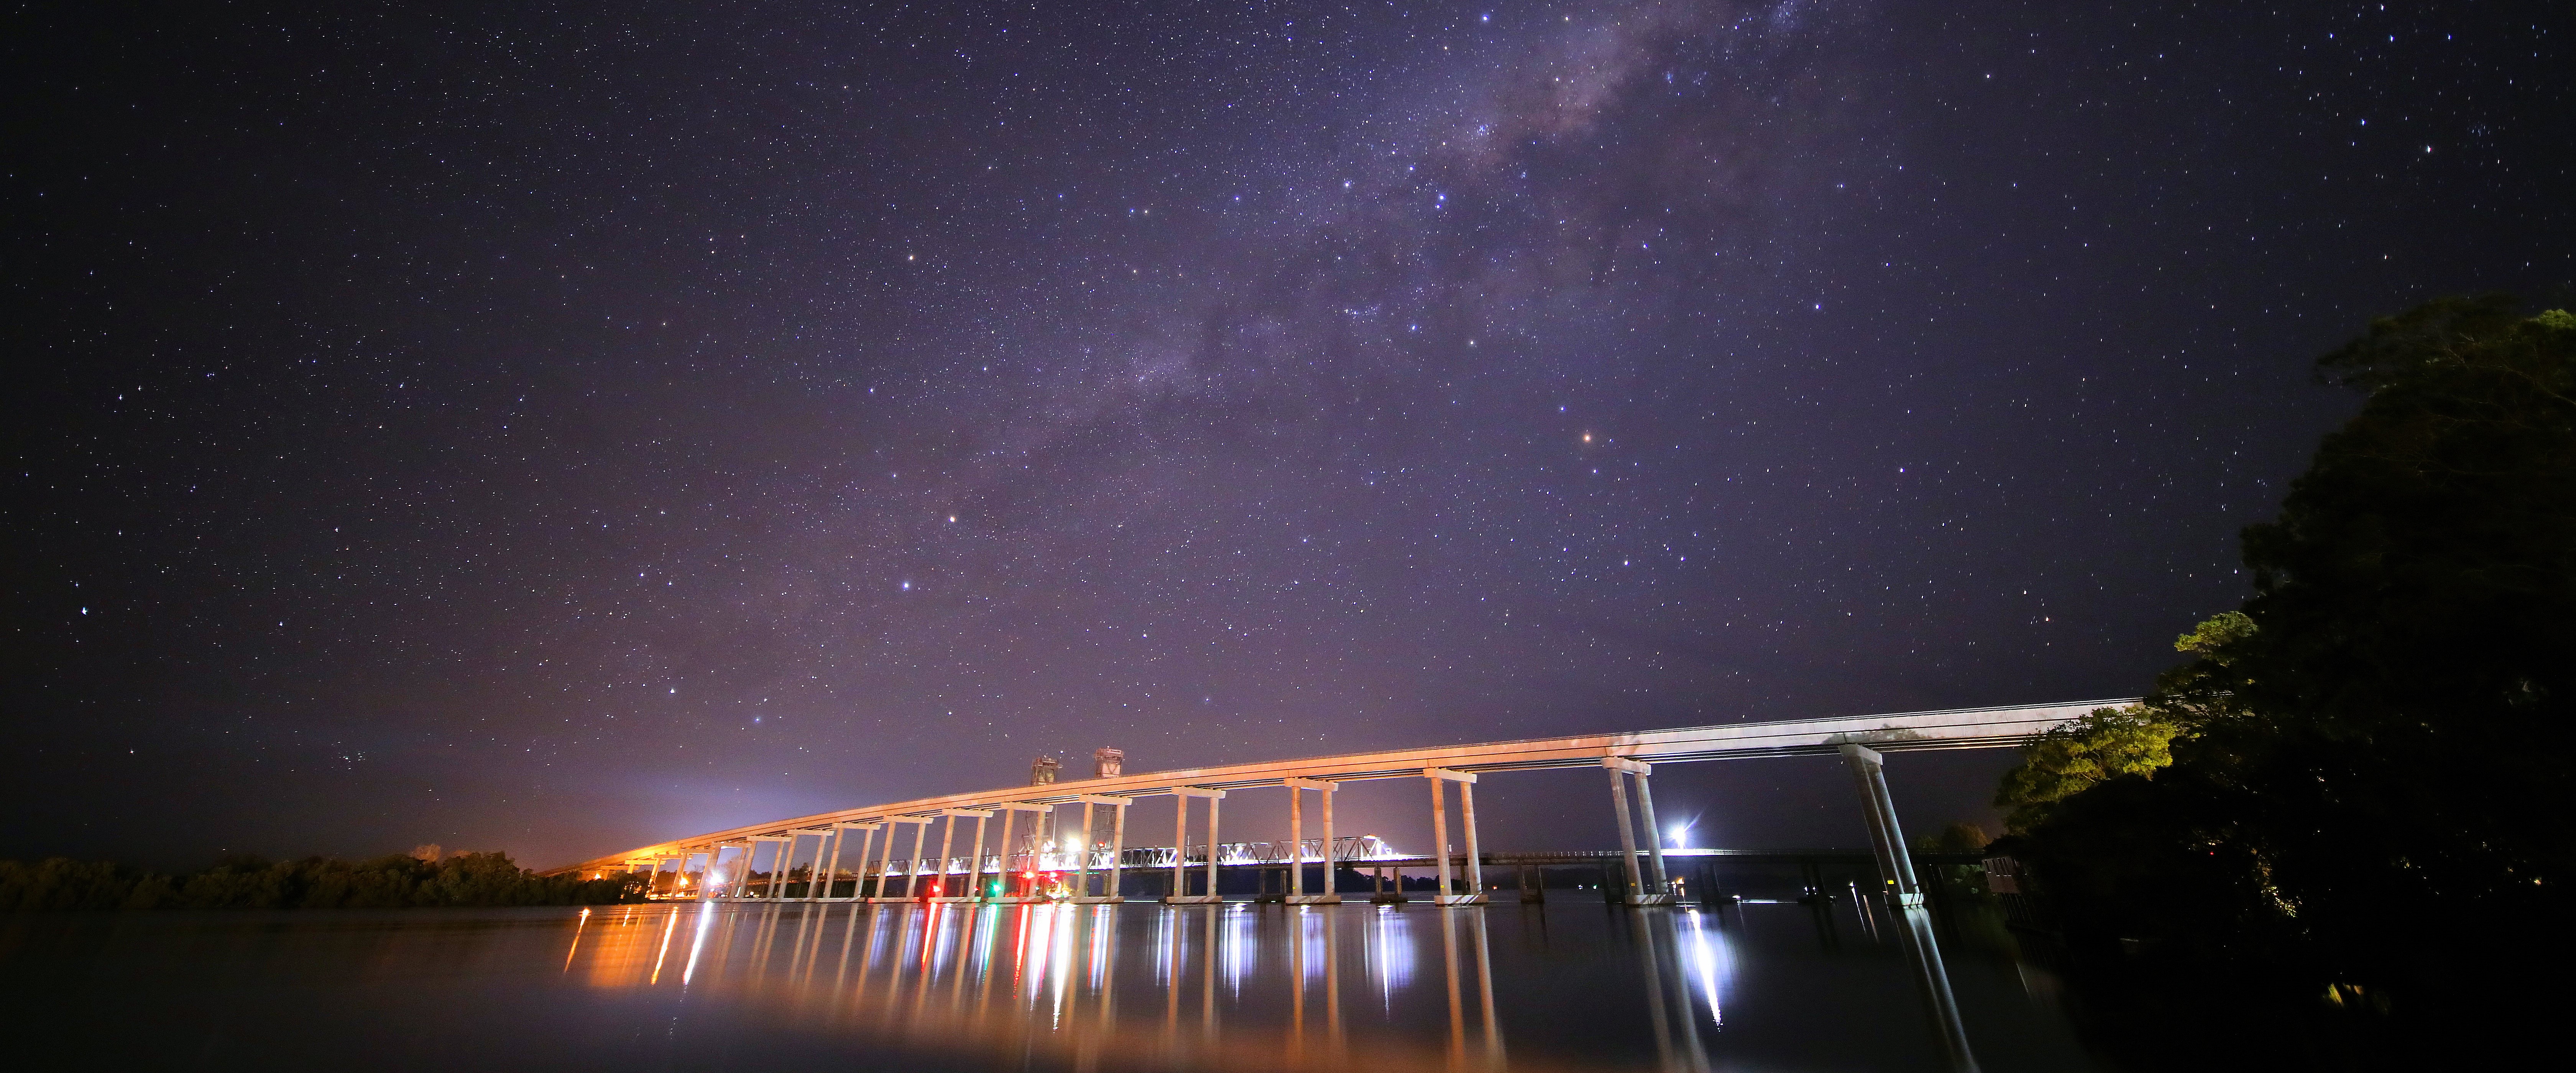 Evening night sky with new road bridge over the Clarence River at Harwood